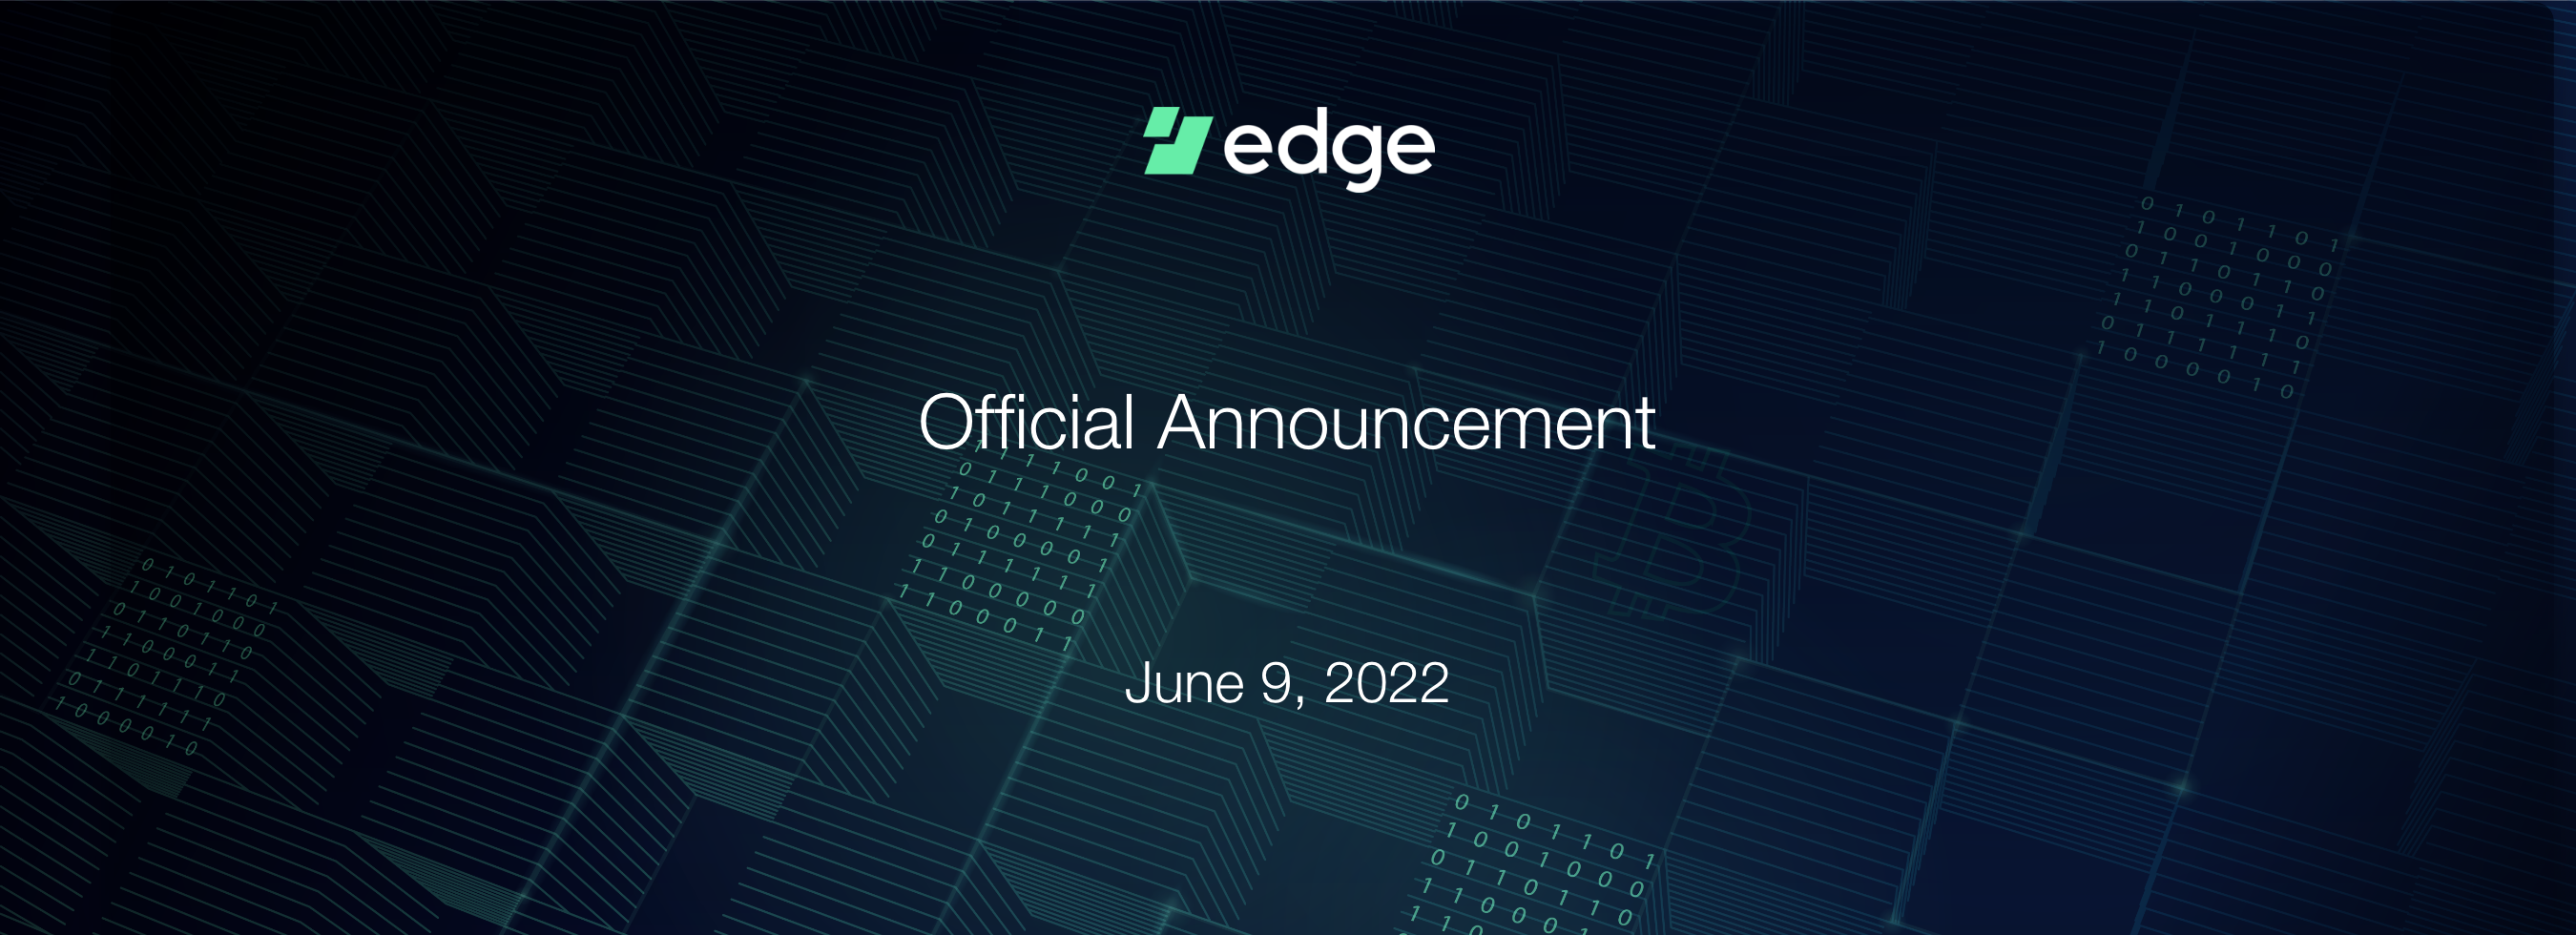 Official Announcement on the Edge Card